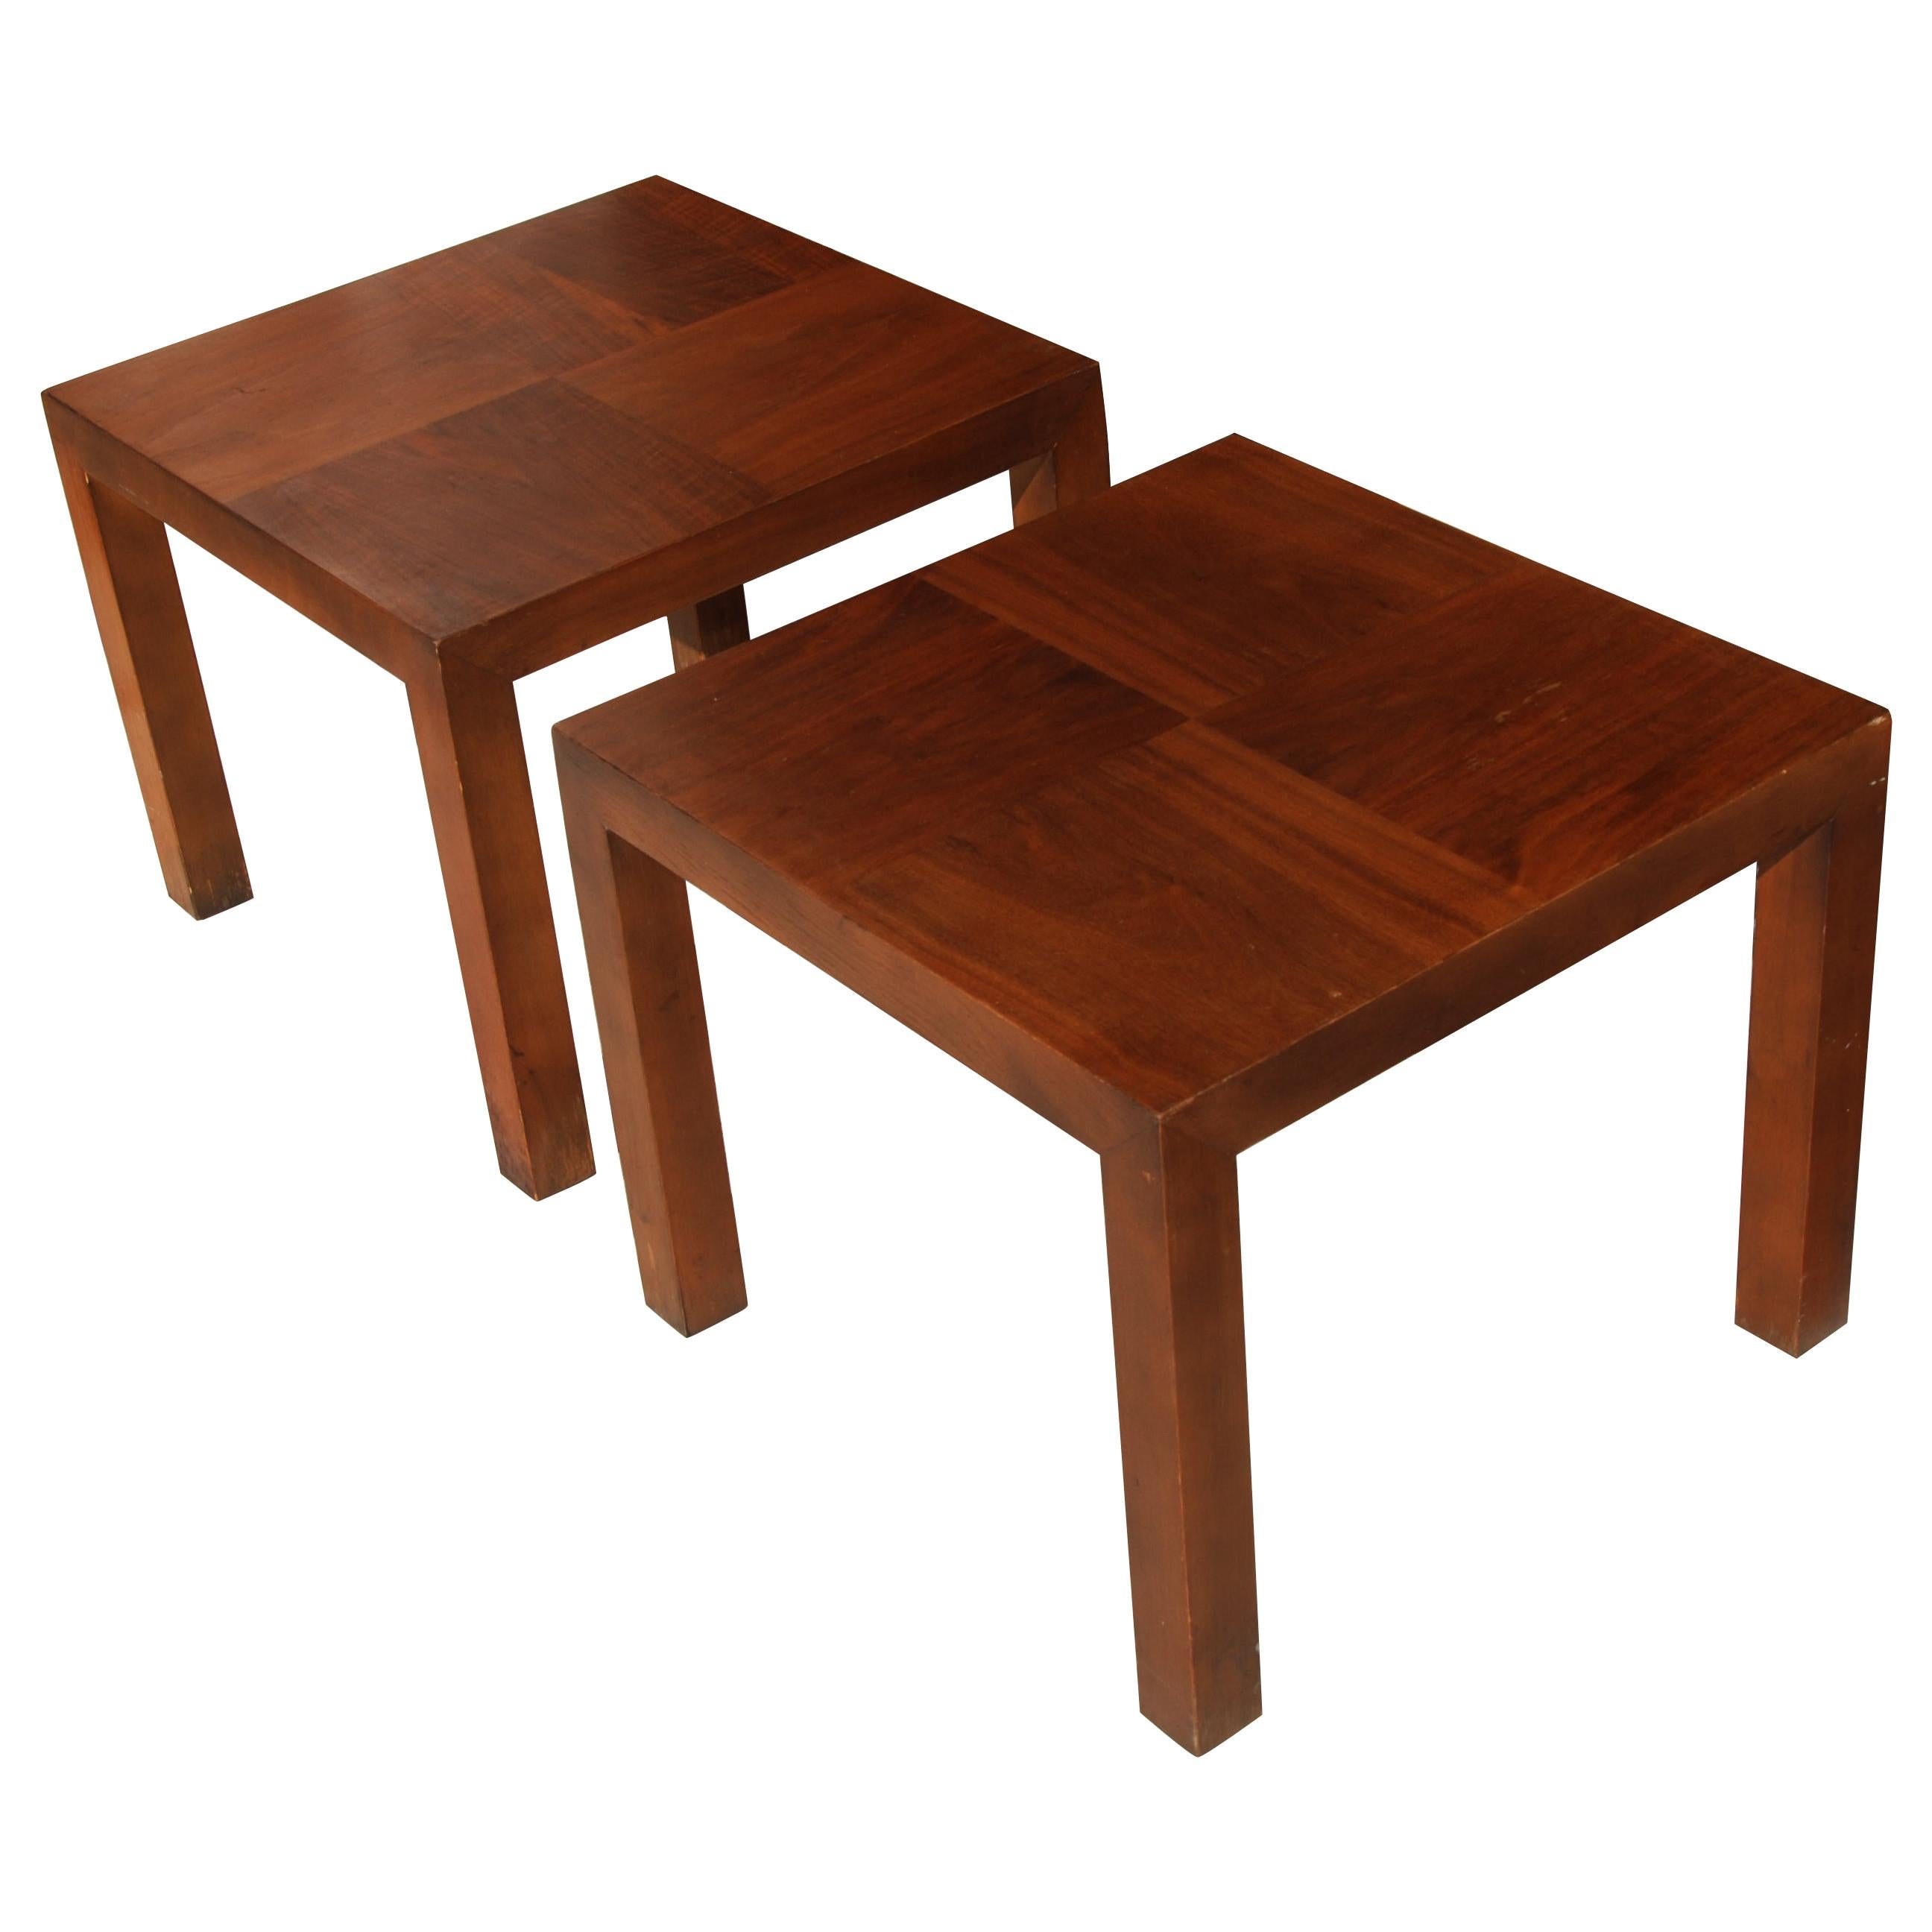 Square Walnut End Tables by Lane Furniture